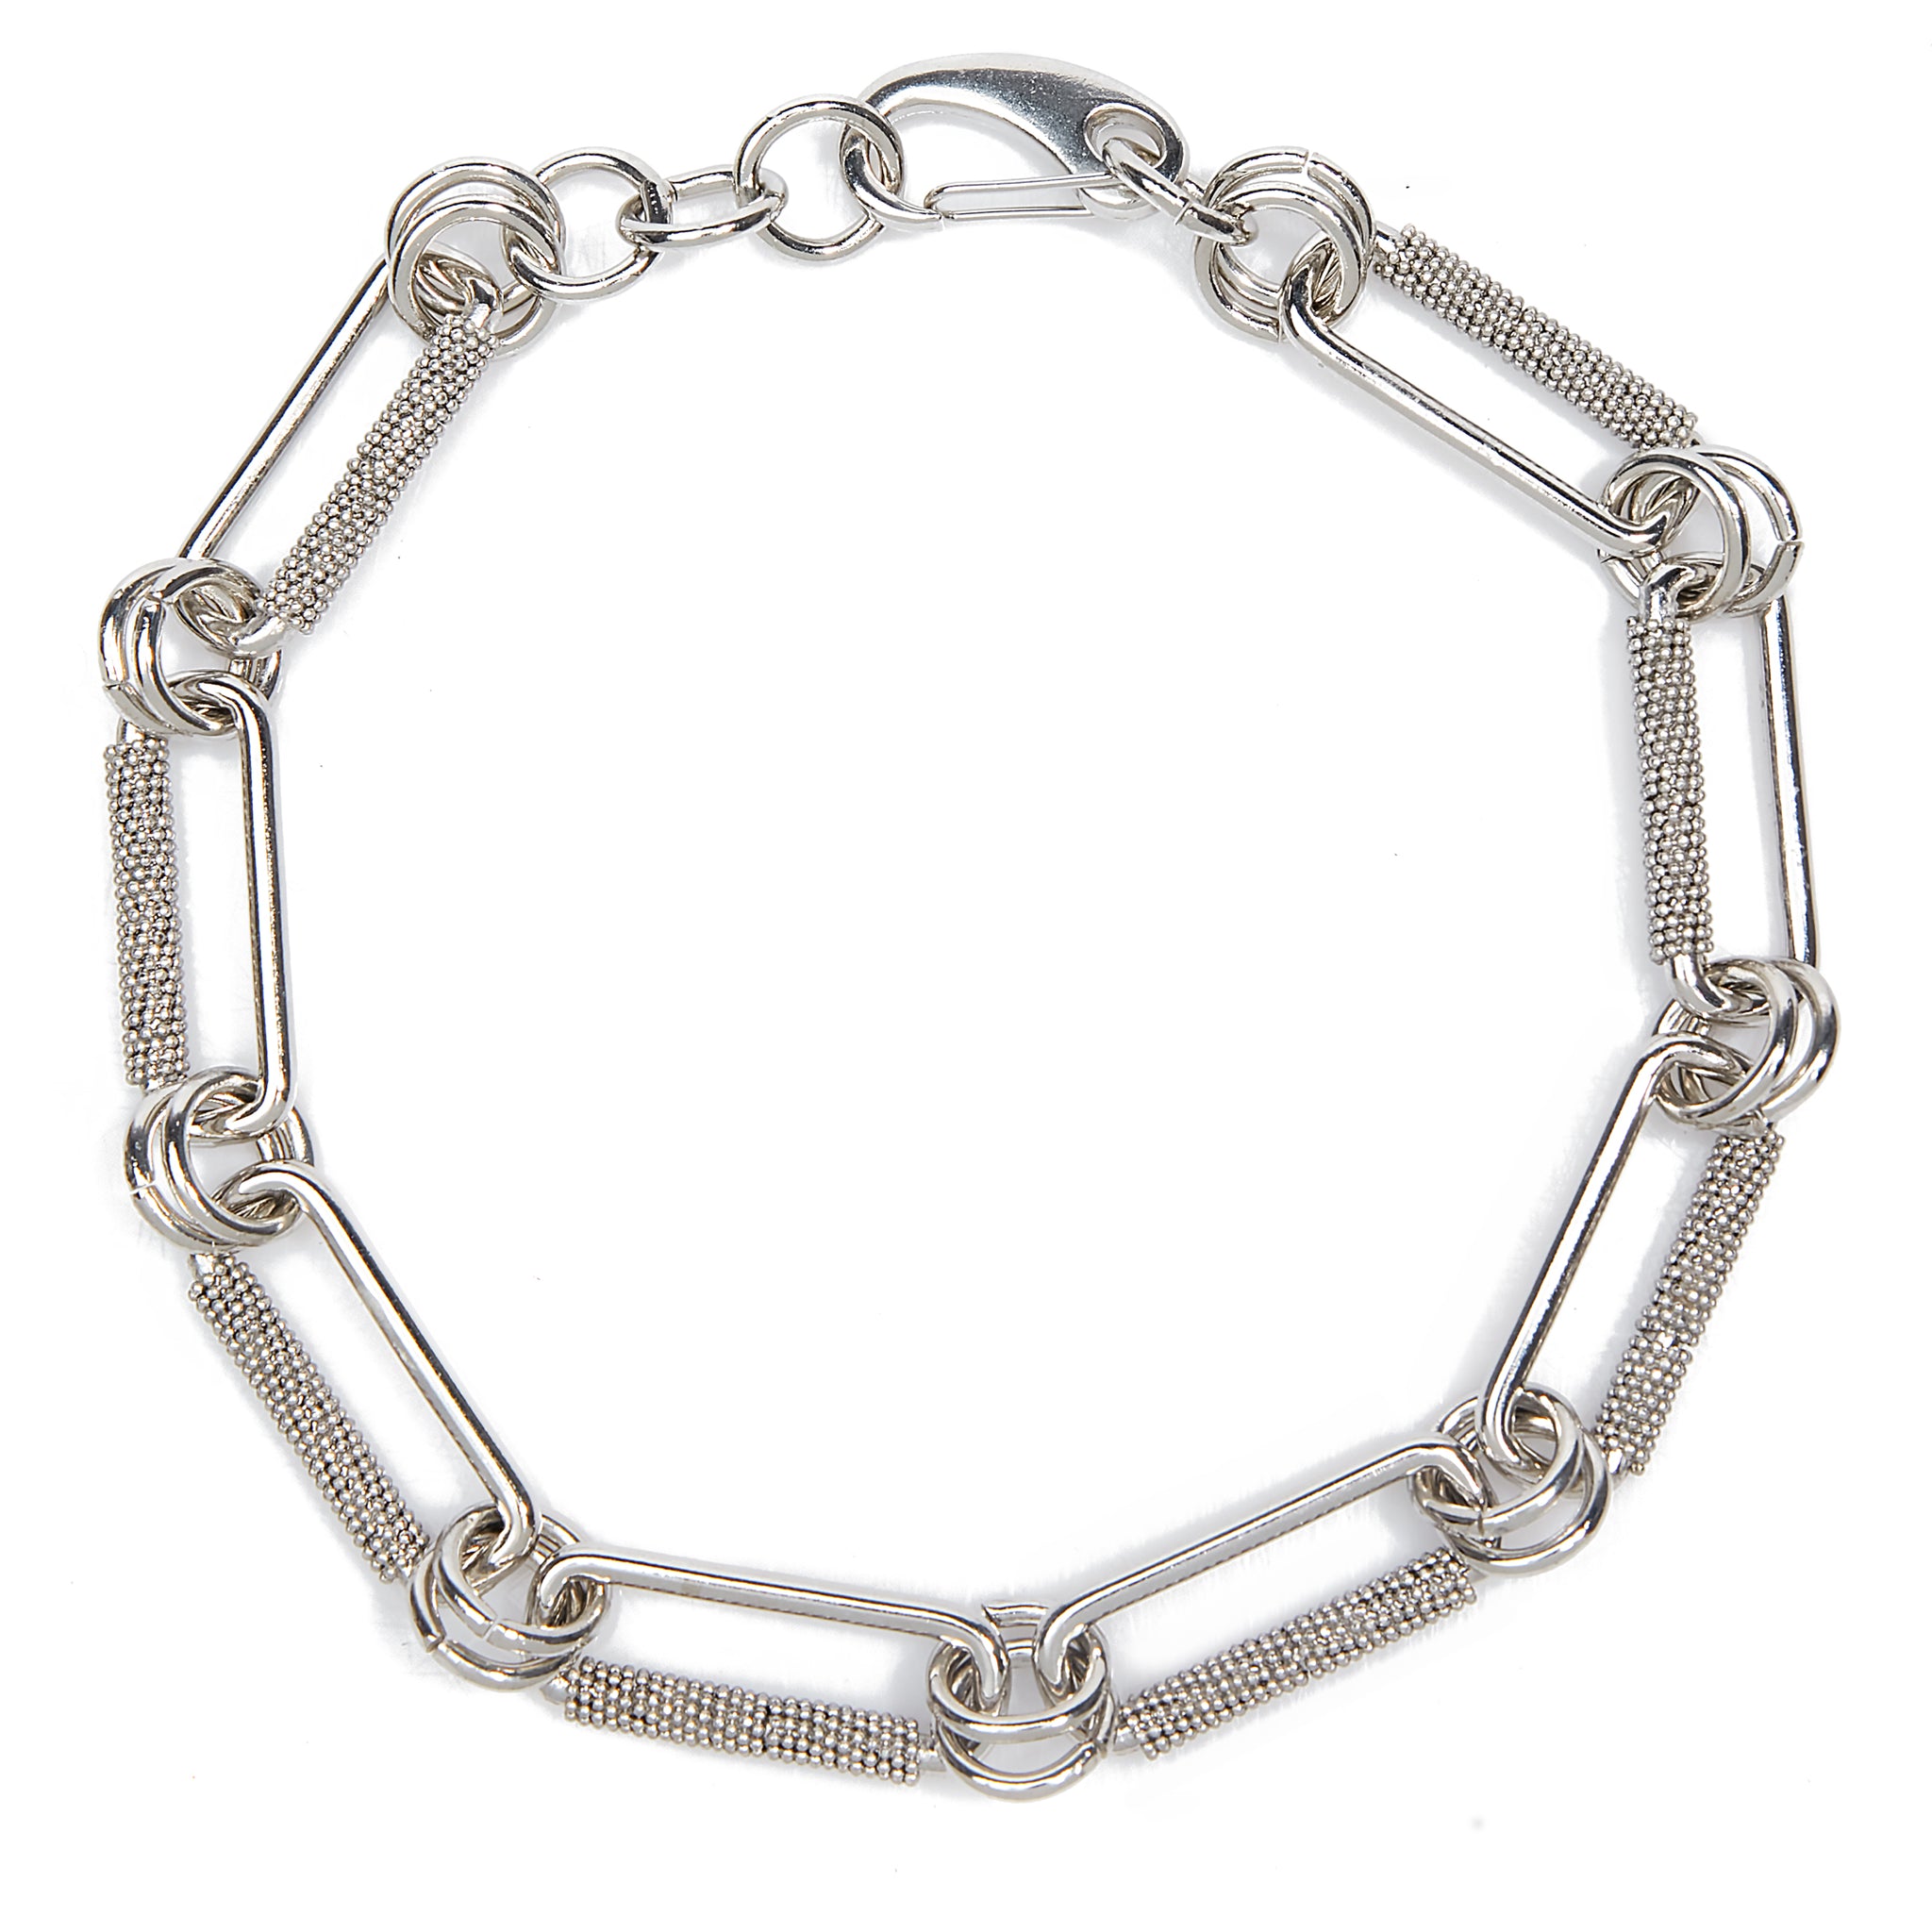 FABIANA FILIPPI Large Chain Link Necklace in Nickel